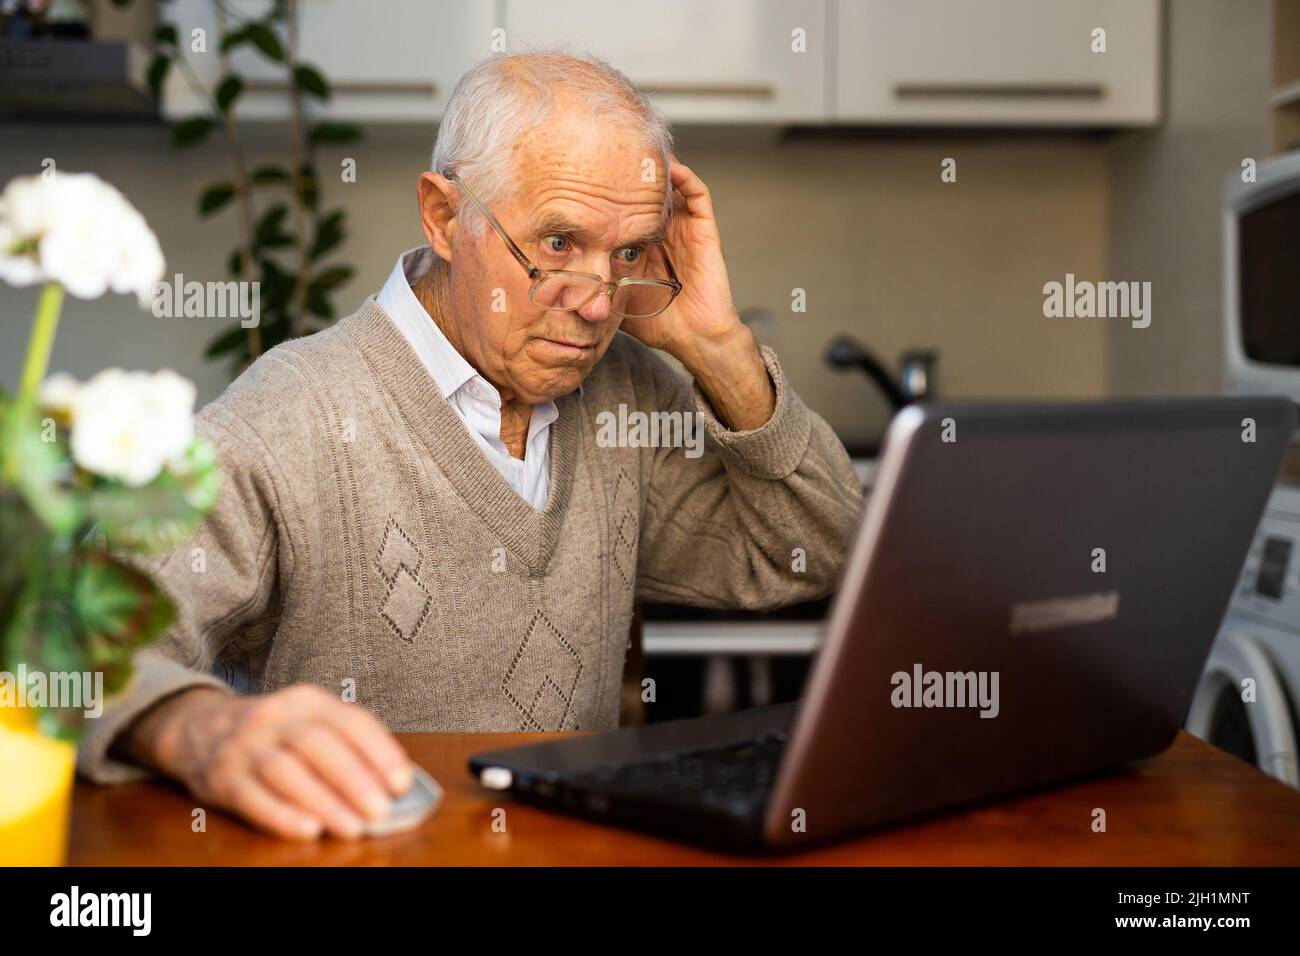 desperate old man pensioner chatting online via laptop with friends at home Stock Photo